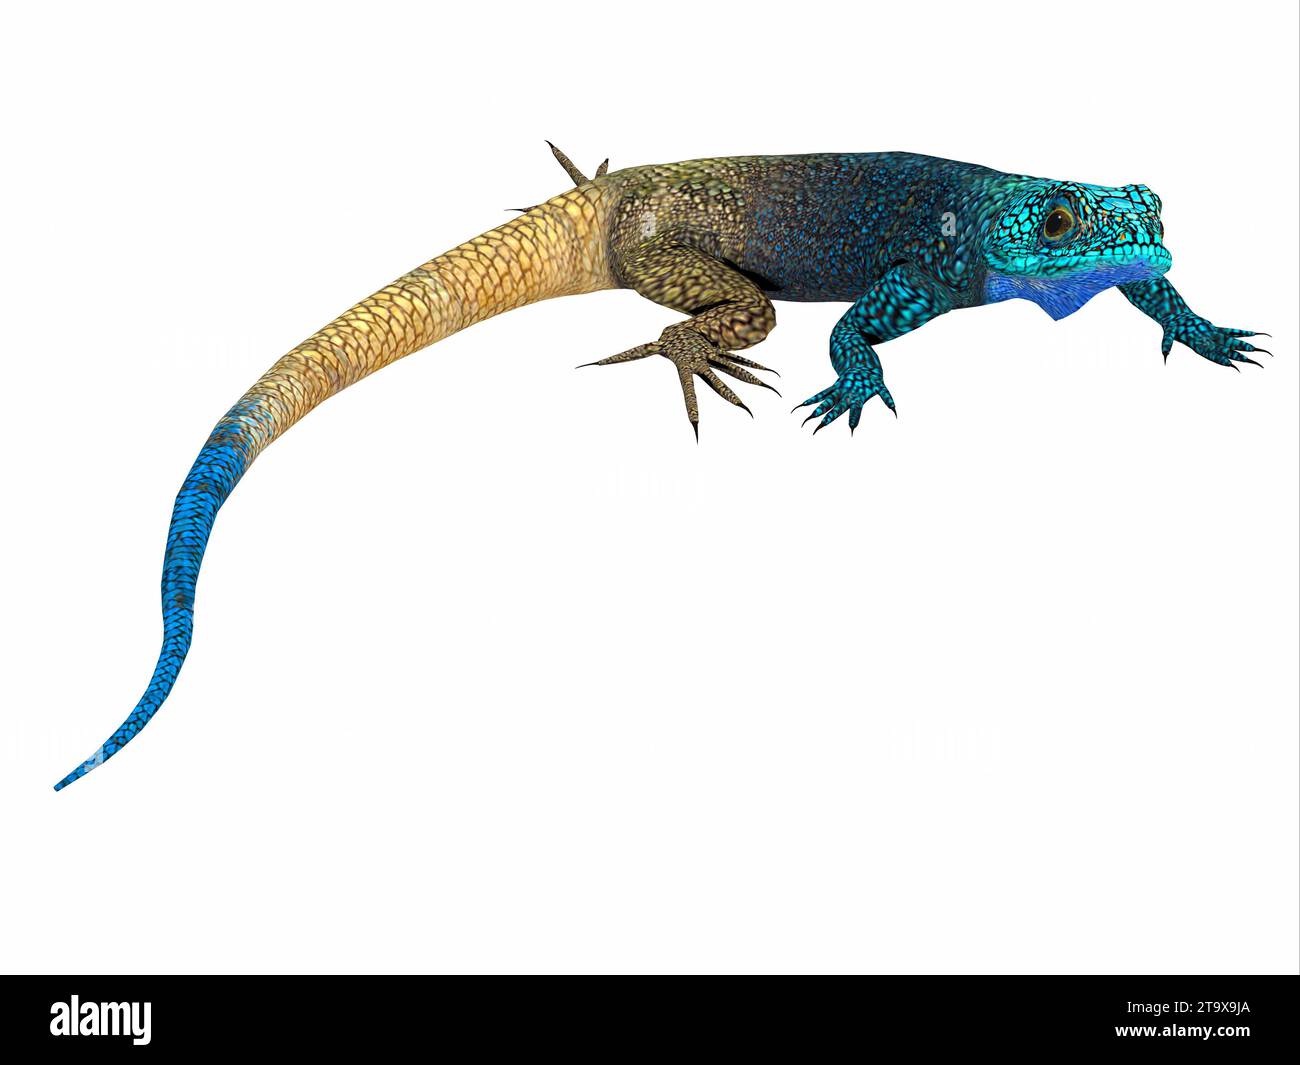 Black-Necked Agama - This cold blooded male lizard is a small predator that lives in Africa. Stock Photo